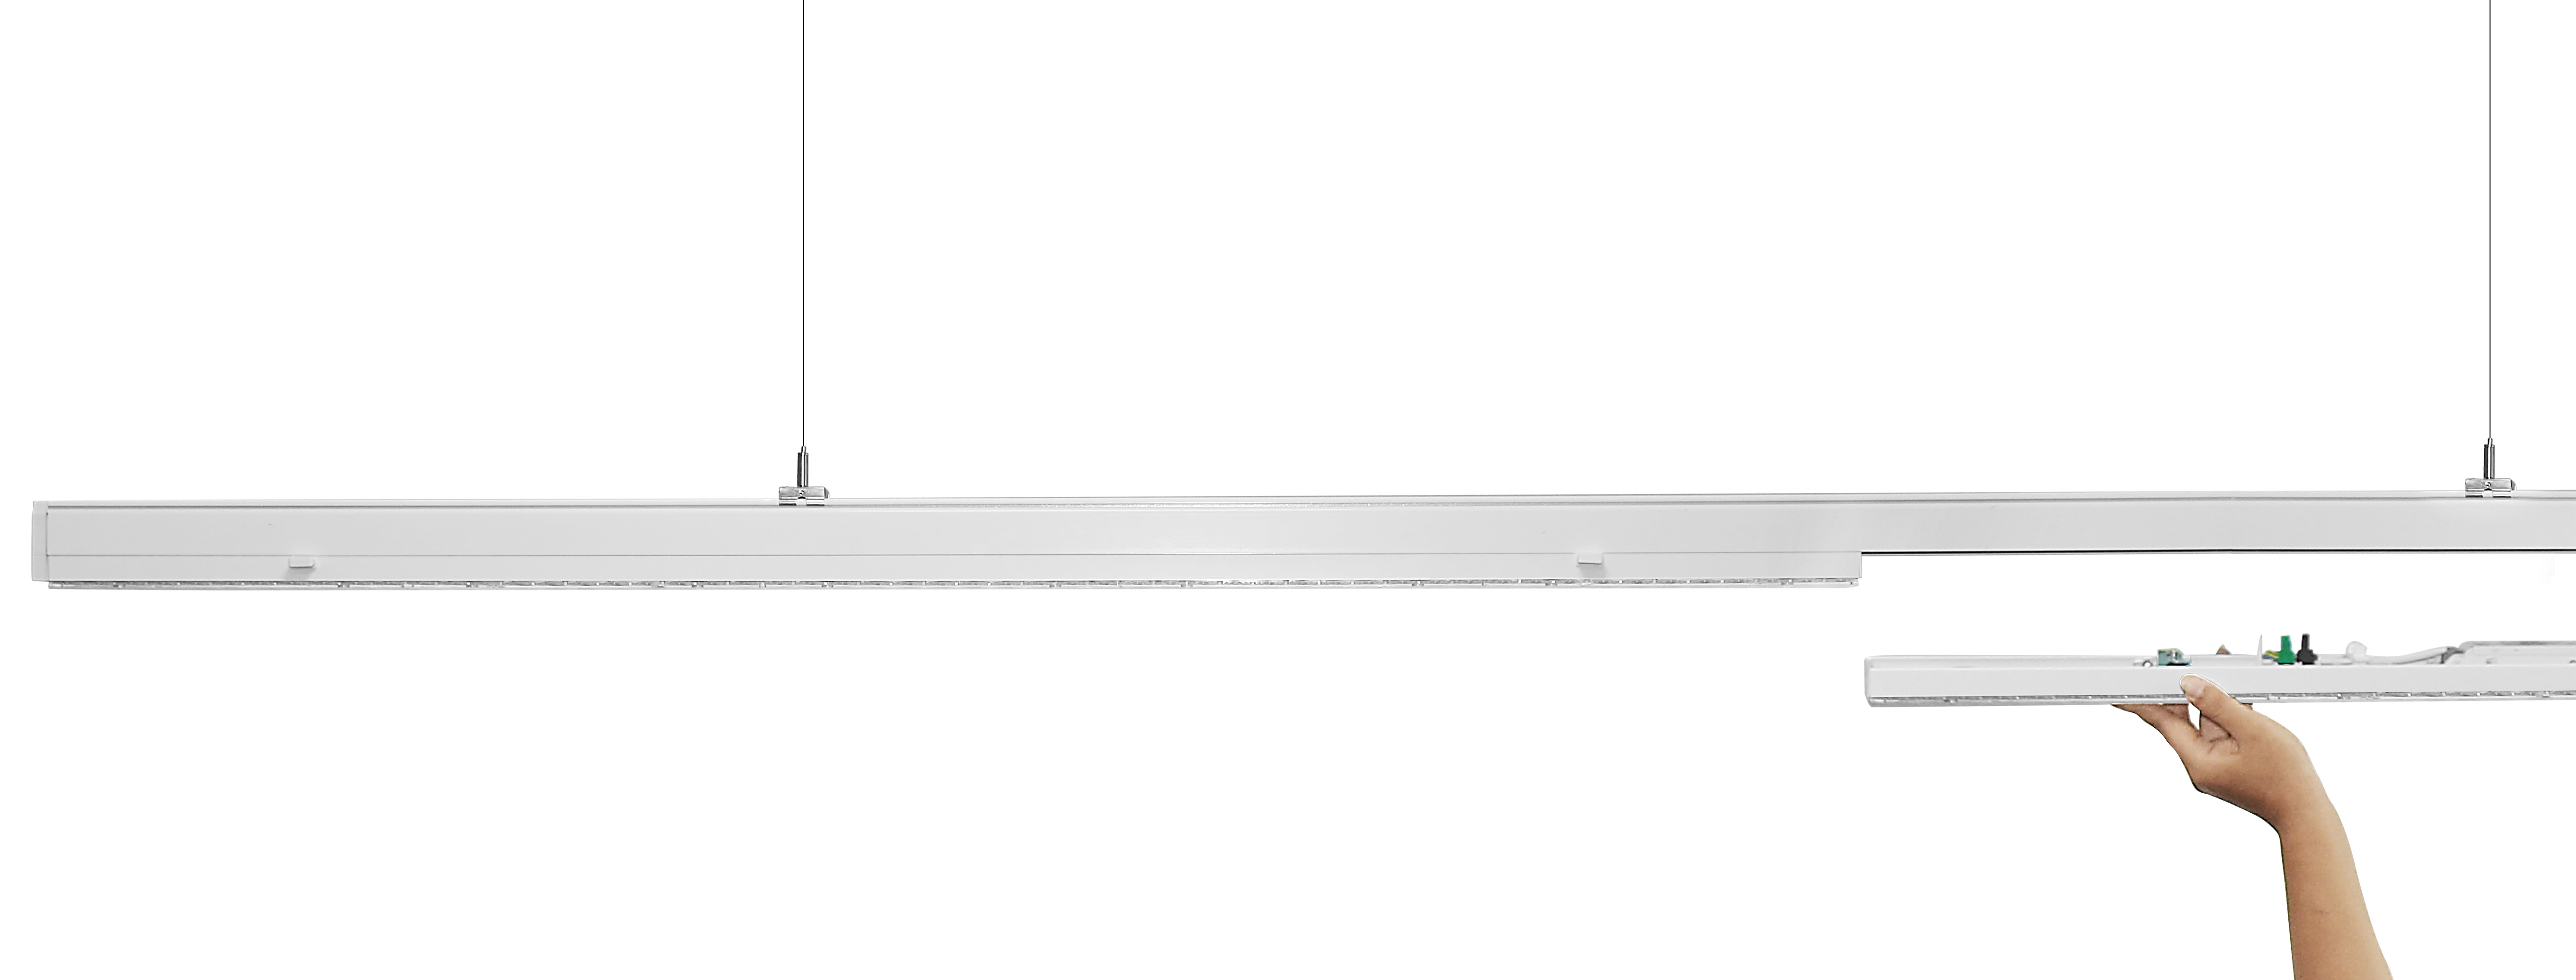 Non dimming Recessed LED Linear Light , High lumen LED Trunking System PC cover